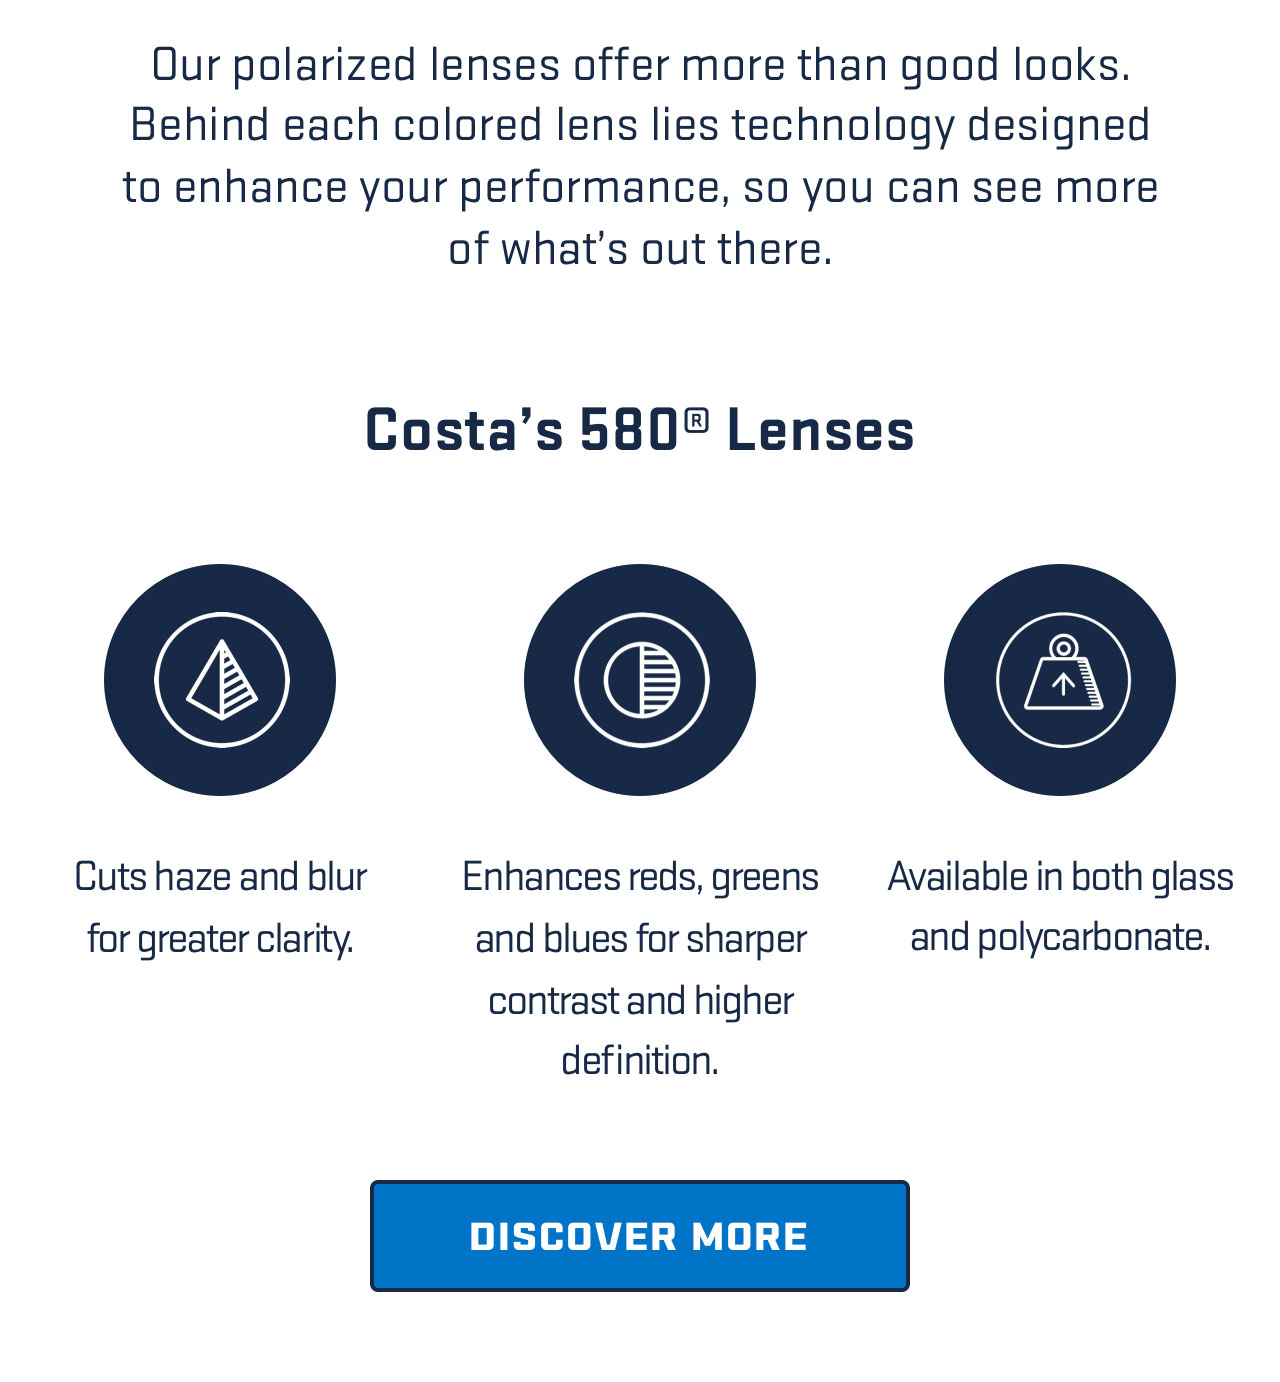 

Our polarized lenses offer more than good looks. 
Behind each colored lens lies technology designed
to enhance your performance, so you can see more
of what's out there.

Costa's 580? Lenses

Cuts haze and blur
for greater clarity.

Enhances reds, greens
and blues for sharper
contrast and higher 
definition.

Available in both glass 
and polycarbonate.

[ DISCOVER MORE ]


									